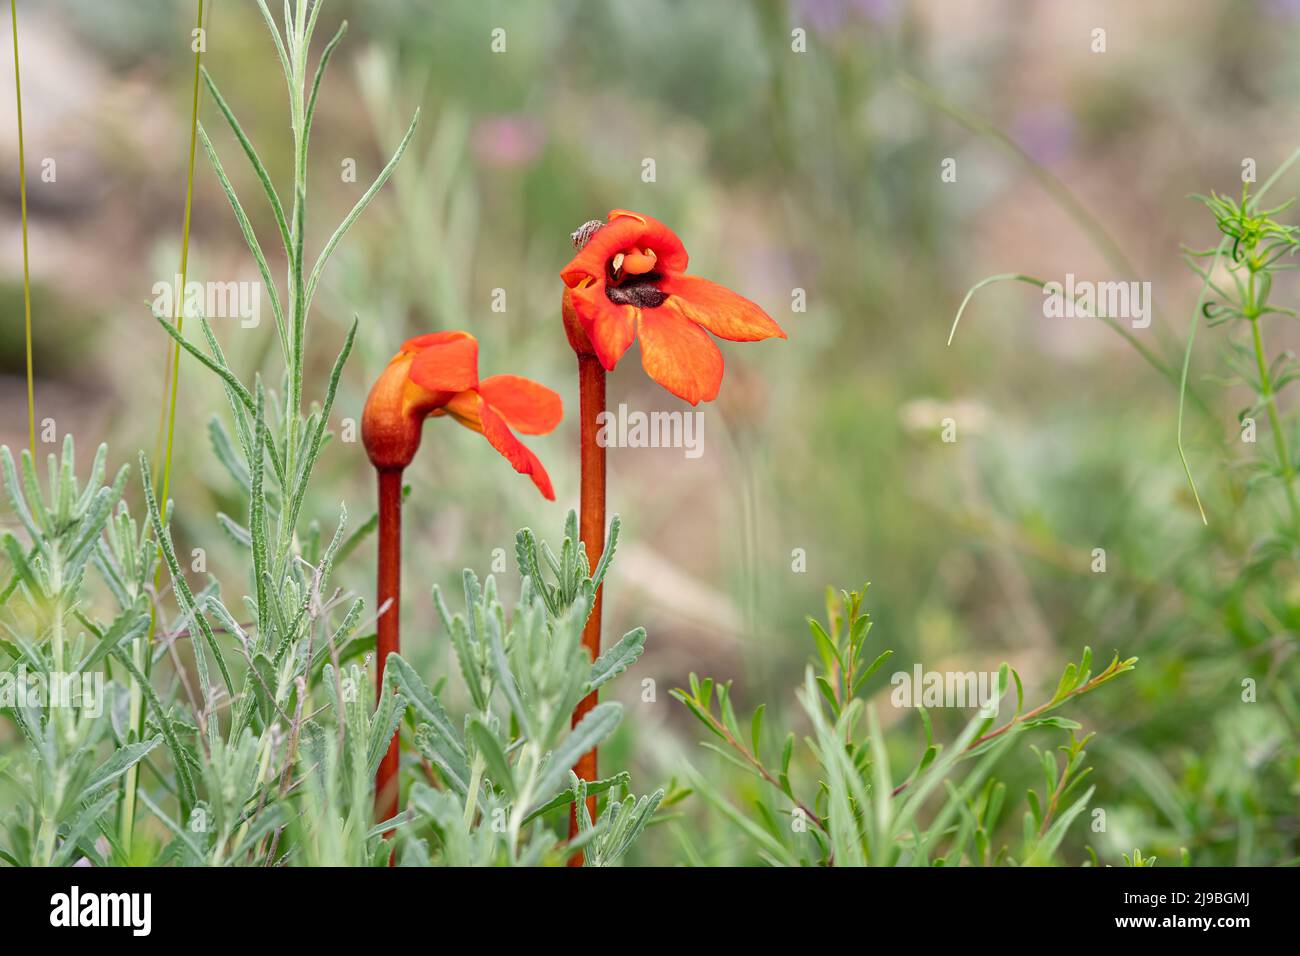 beautiful red flowers of Phelypaea with small jumping spider on a petal against blurred spring landscape Stock Photo